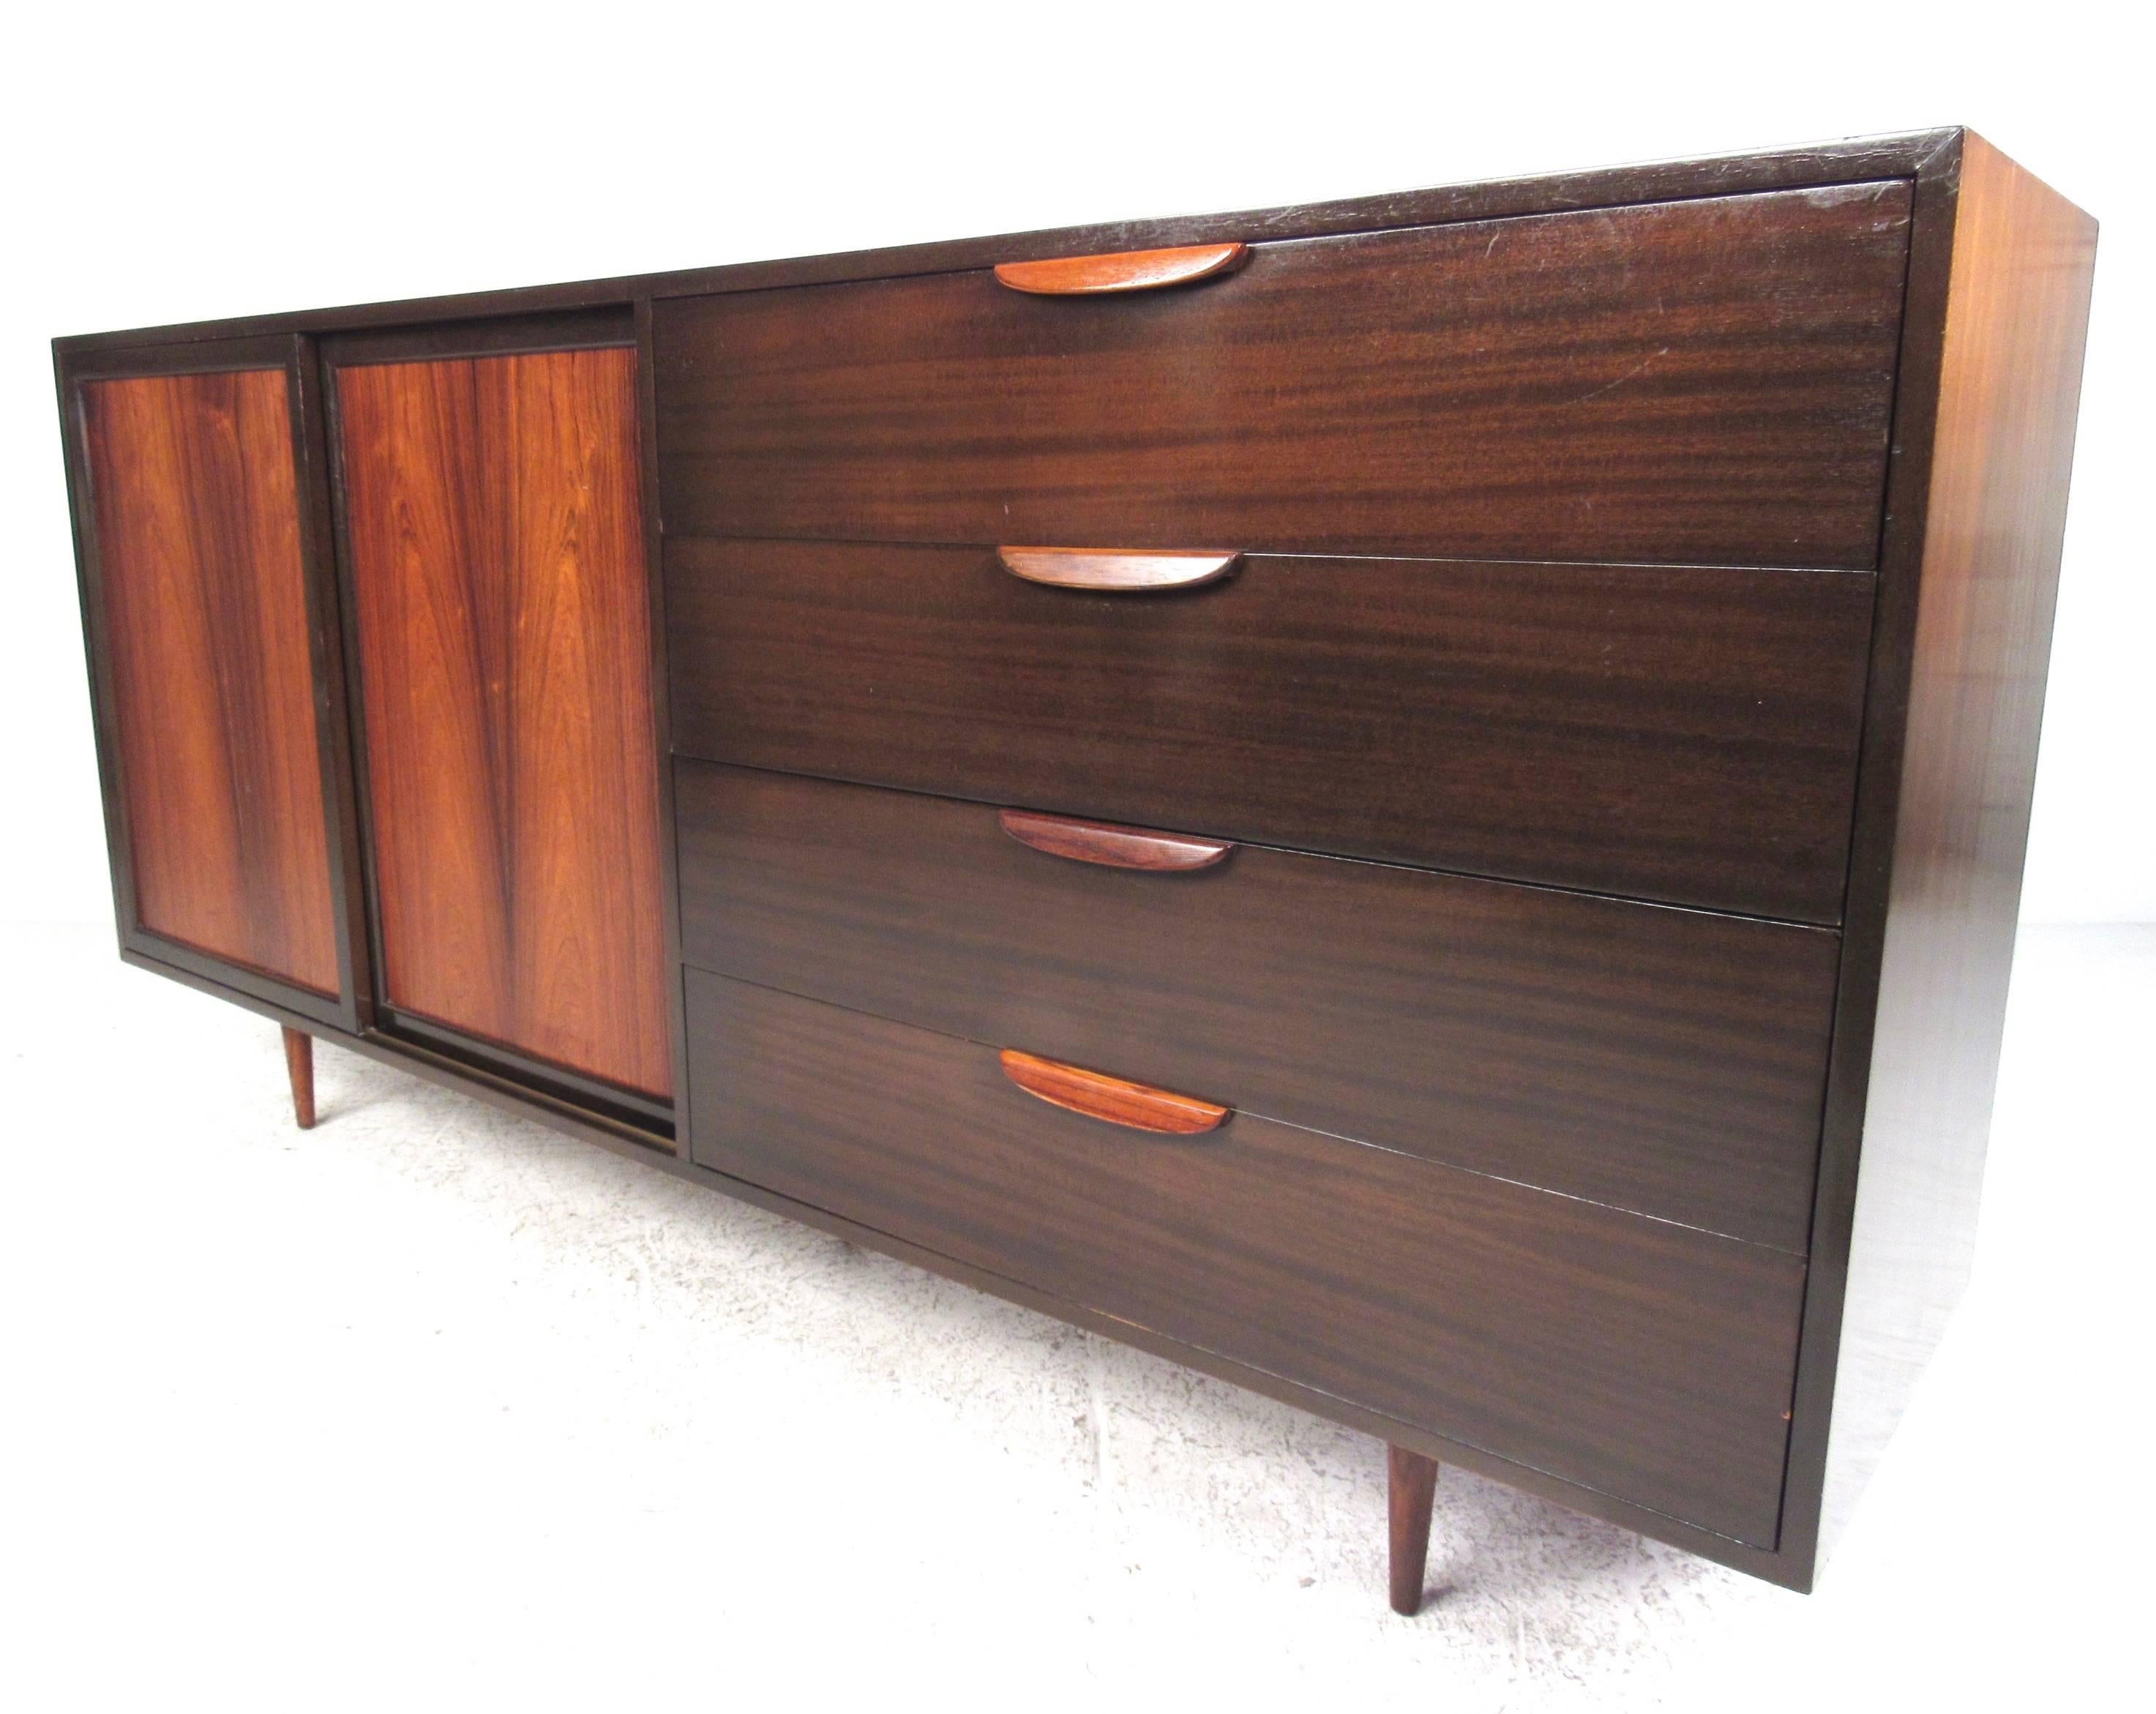 This unique side by side storage piece by Harvey Probber features spacious drawers for storage in any room. Perfect Mid-Century Modern piece for use as a credenza or bedroom dresser. Beautiful vintage mahogany and rosewood construction is